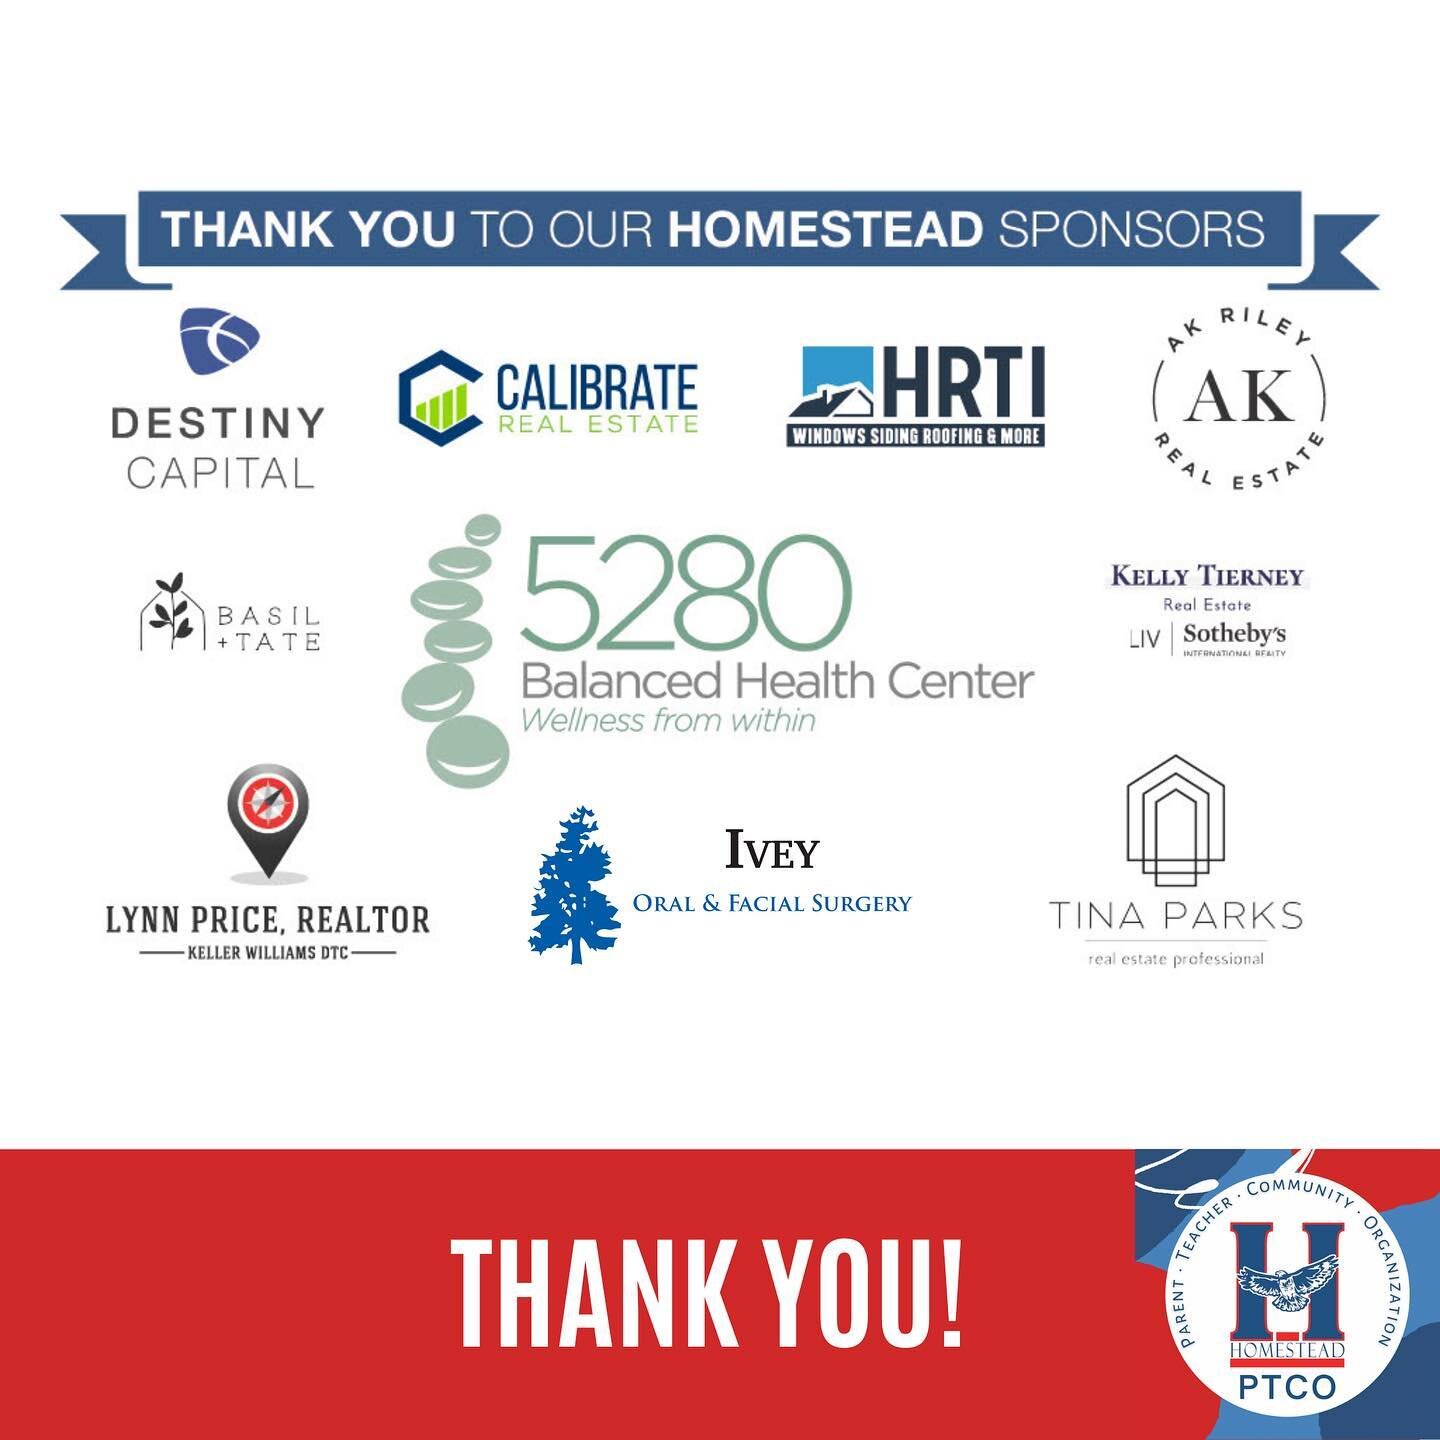 A HUGE THANK YOU to our Homestead Sponsors for another amazing year! 👏🏻👏🏻👏🏻 @lynnlprice @williamsandivey_oralsurgery @tinaparkshomes @kellyrtierney @5280bhc @basilandtate @akrileydenver @hrti_exteriorhomerenovation @calibrate_re